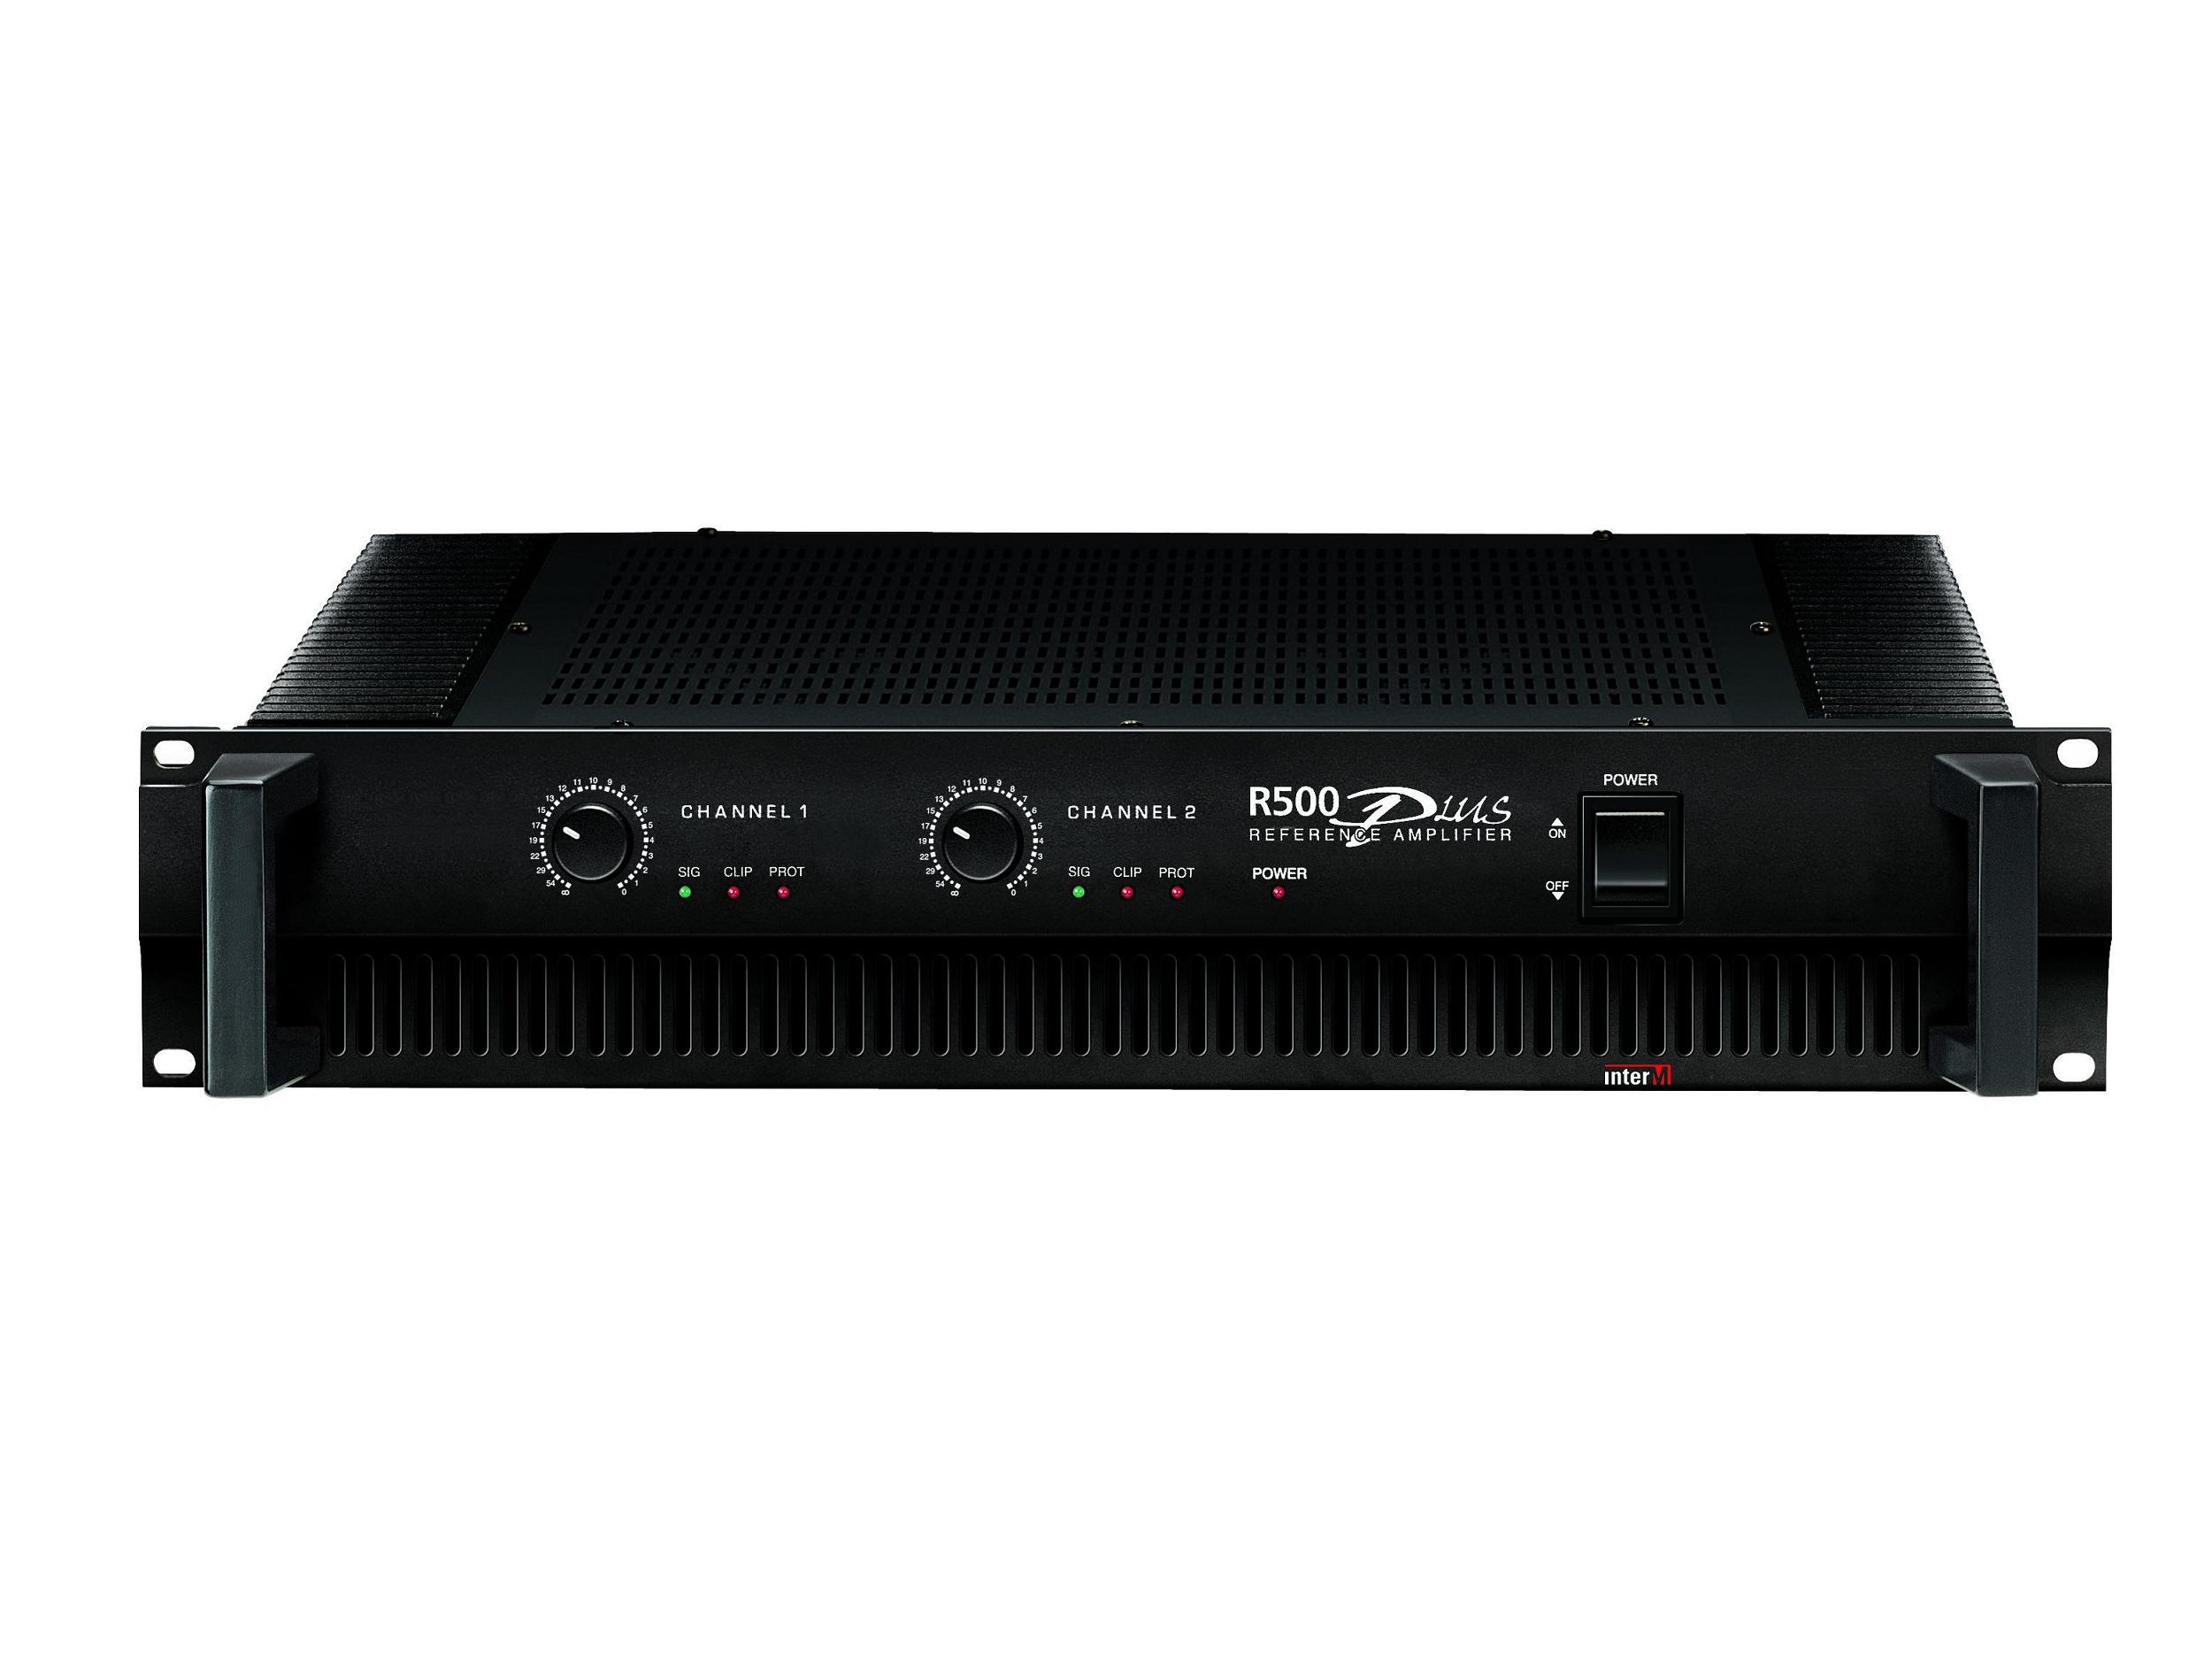 R-500PLUS 2 Channel Reference Power Amplifier 170W (8 Ohm) by Inter-M